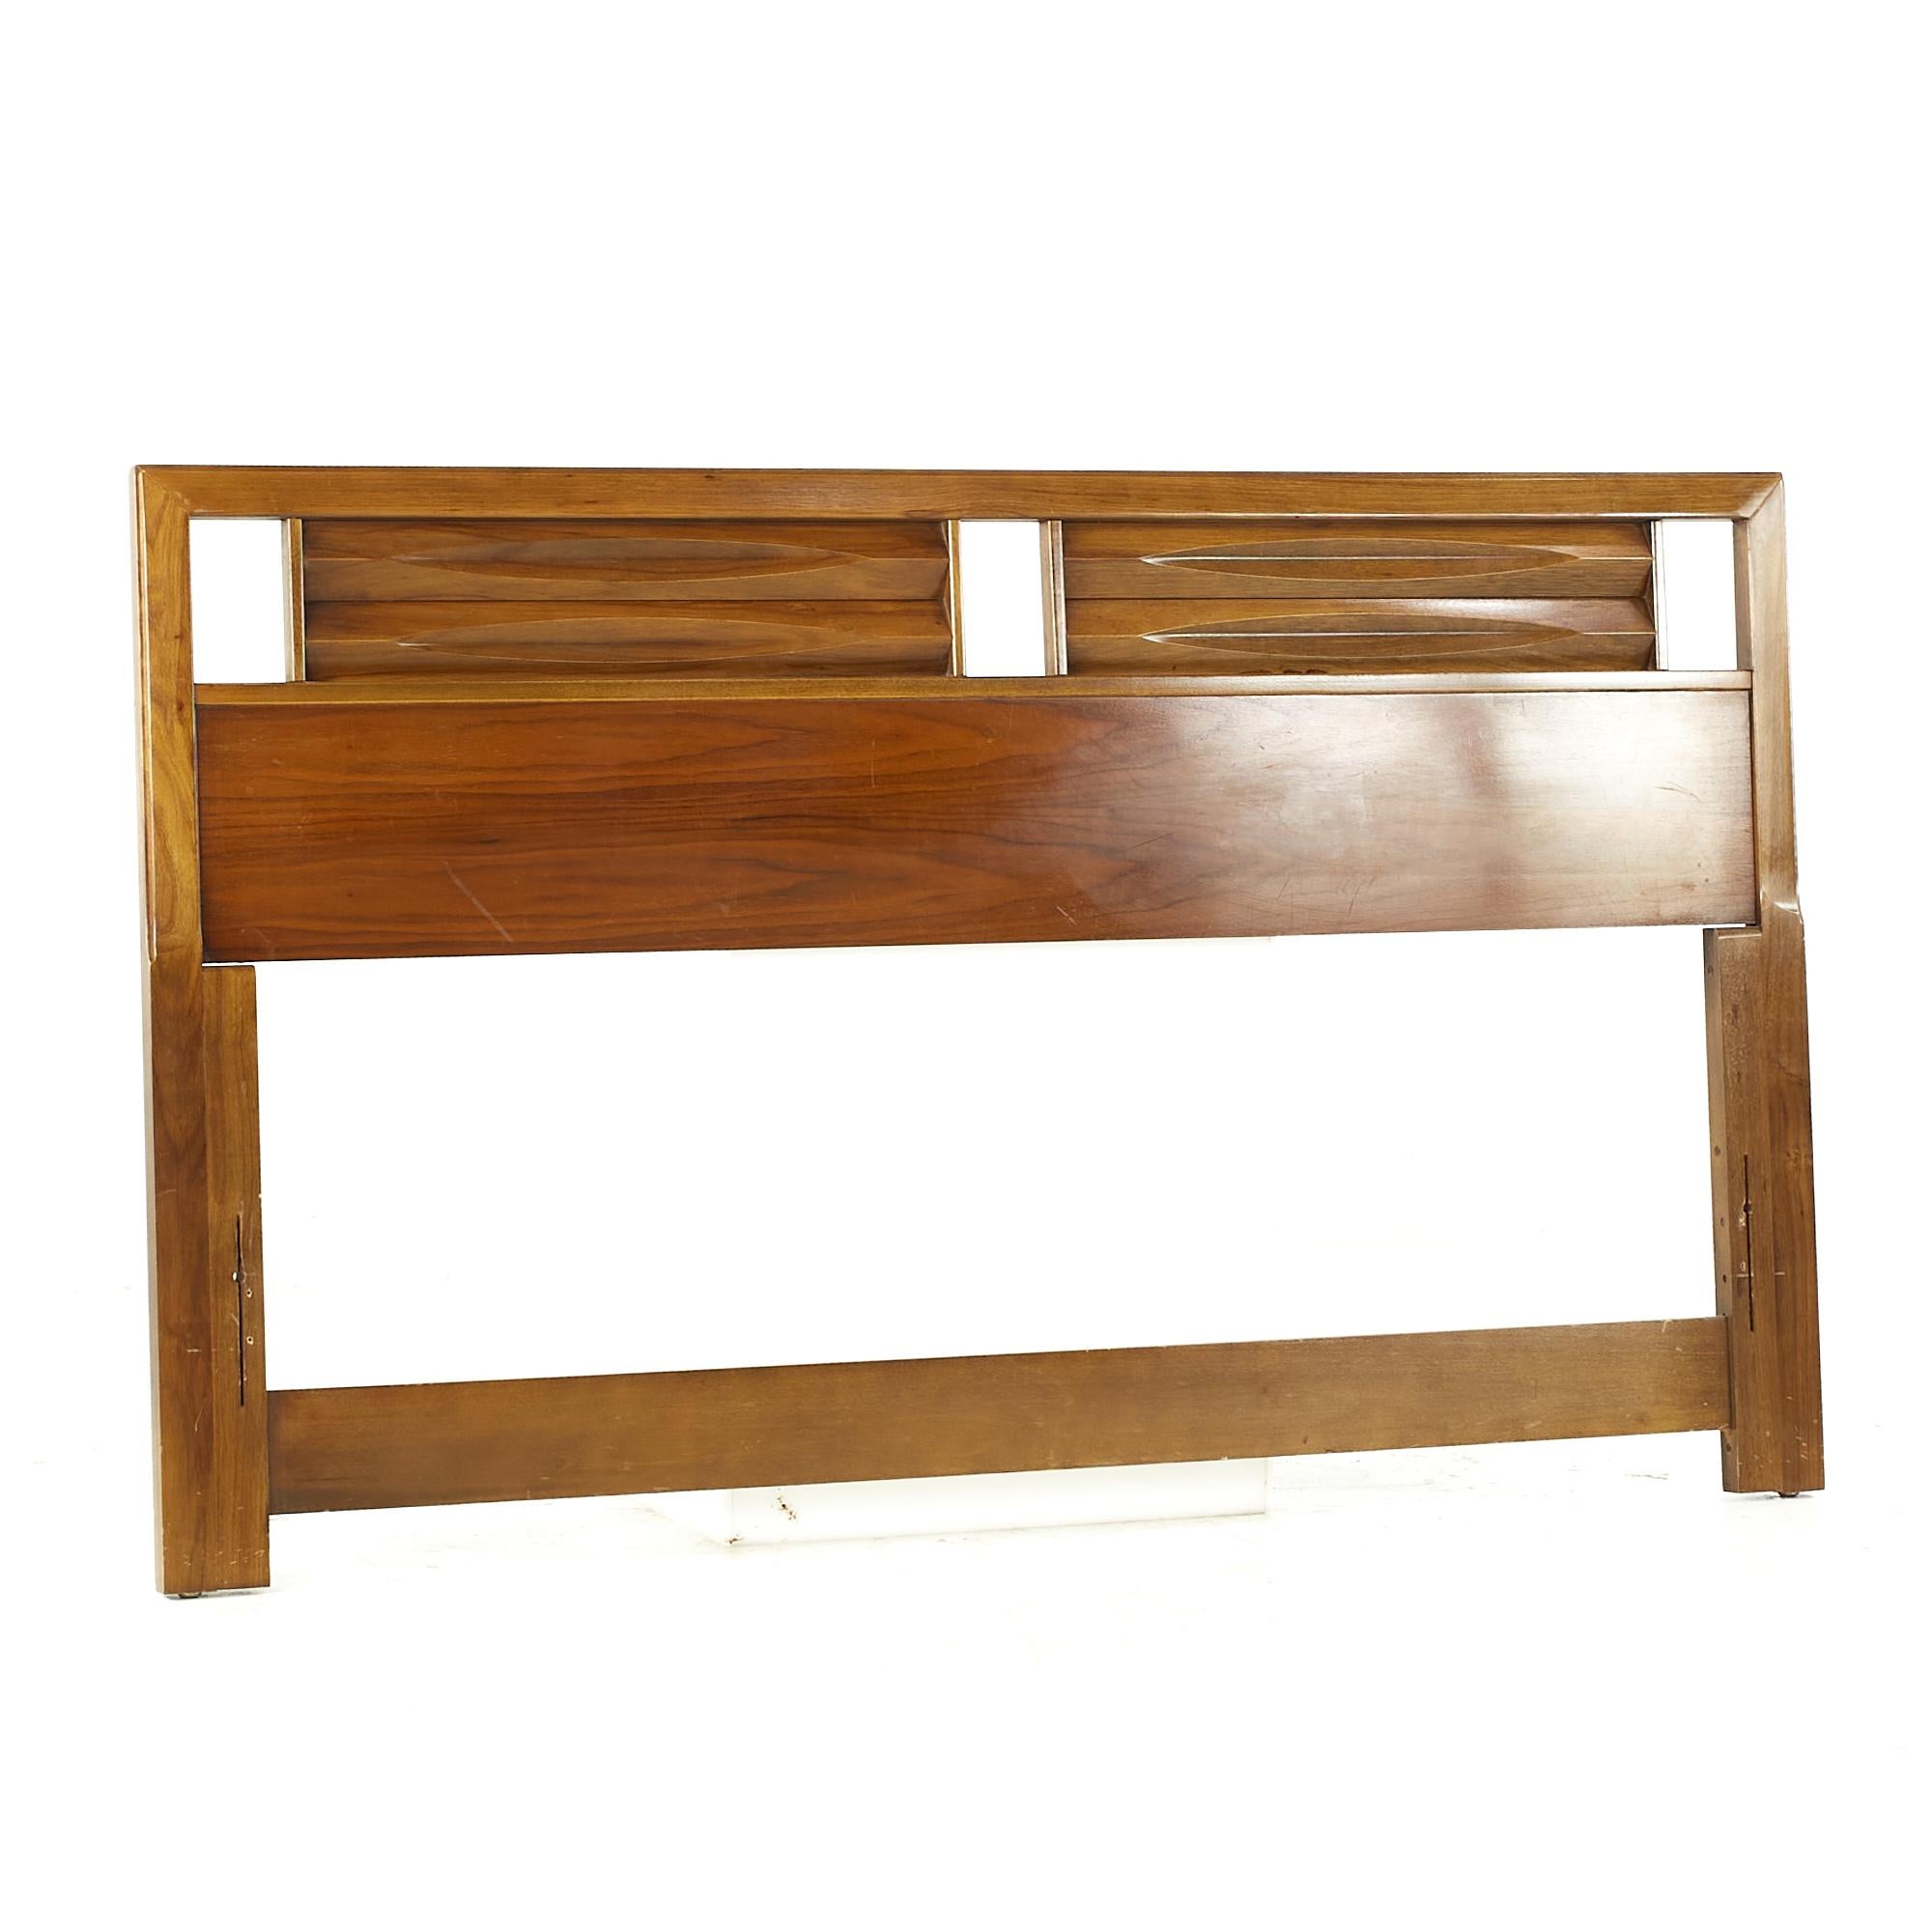 Thomasville midcentury Walnut Queen Headboard

This headboard measures: 59 wide x 1 deep x 36.5 inches high

All pieces of furniture can be had in what we call restored vintage condition. That means the piece is restored upon purchase so it’s